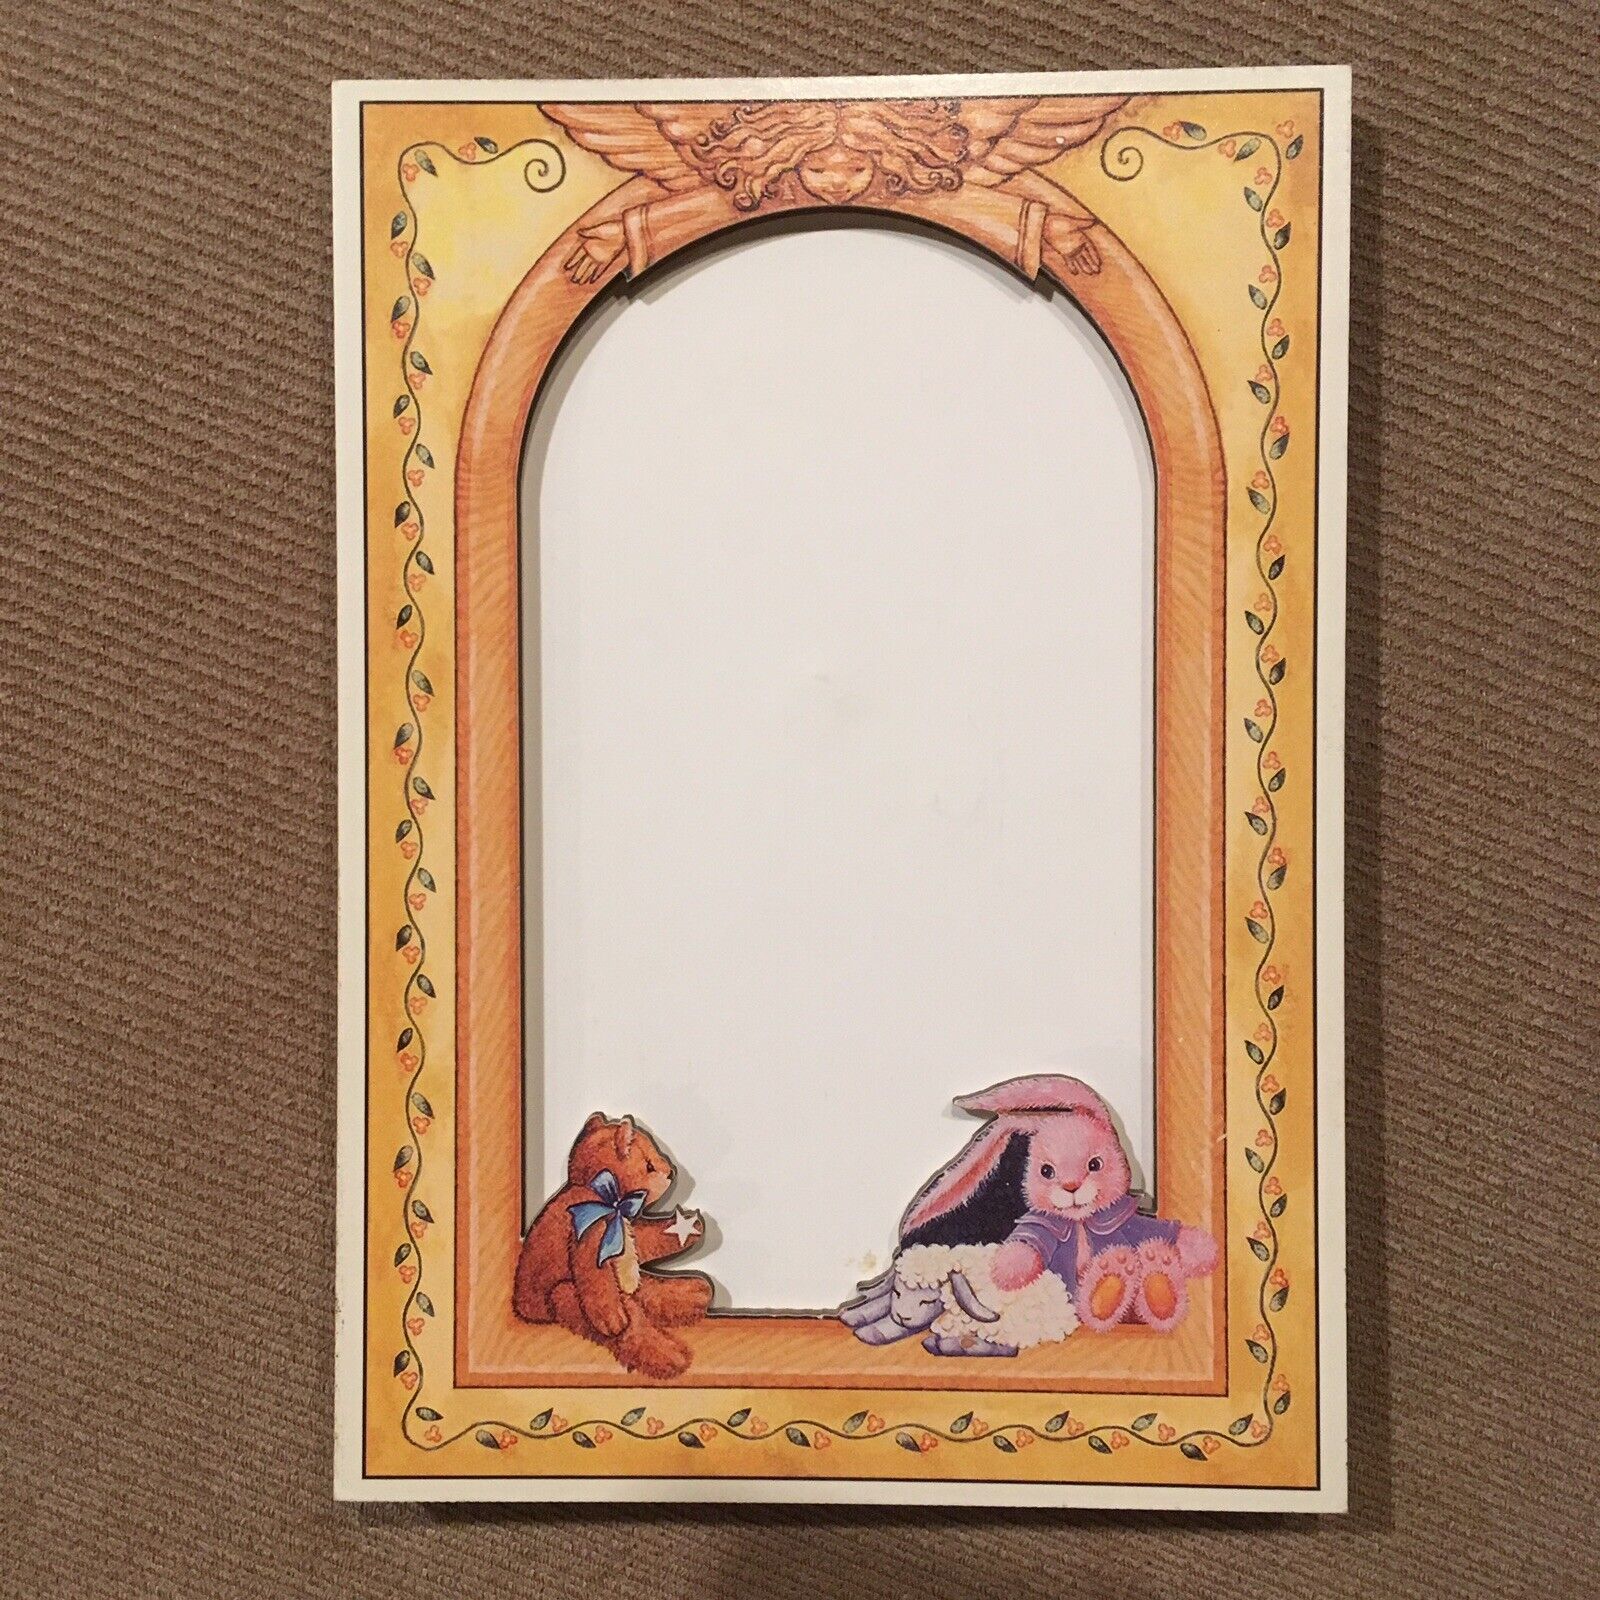 Decorative Wood Frame 3 X Spring new work 5 Columbus Mall Baby Or Picture Young Child